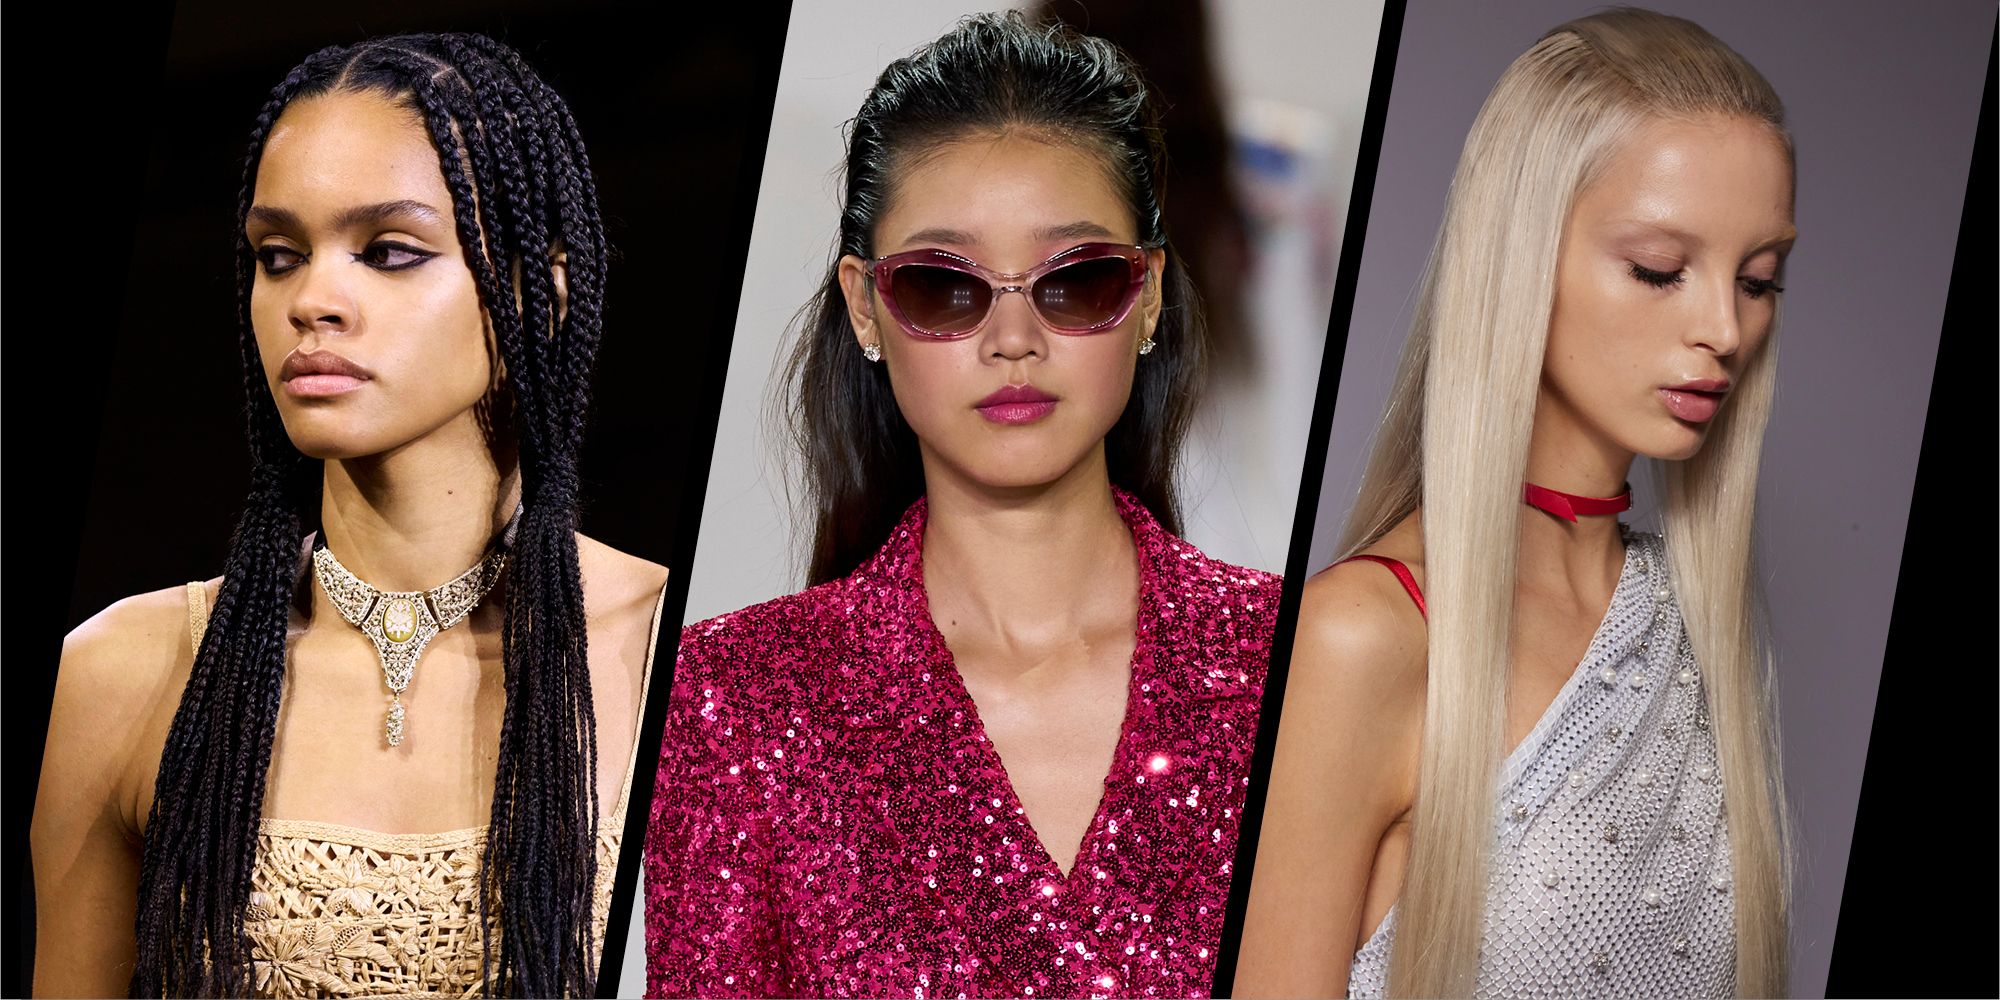 Hair Trends 2023 The 12 Biggest Looks According to Experts  Who What  Wear UK